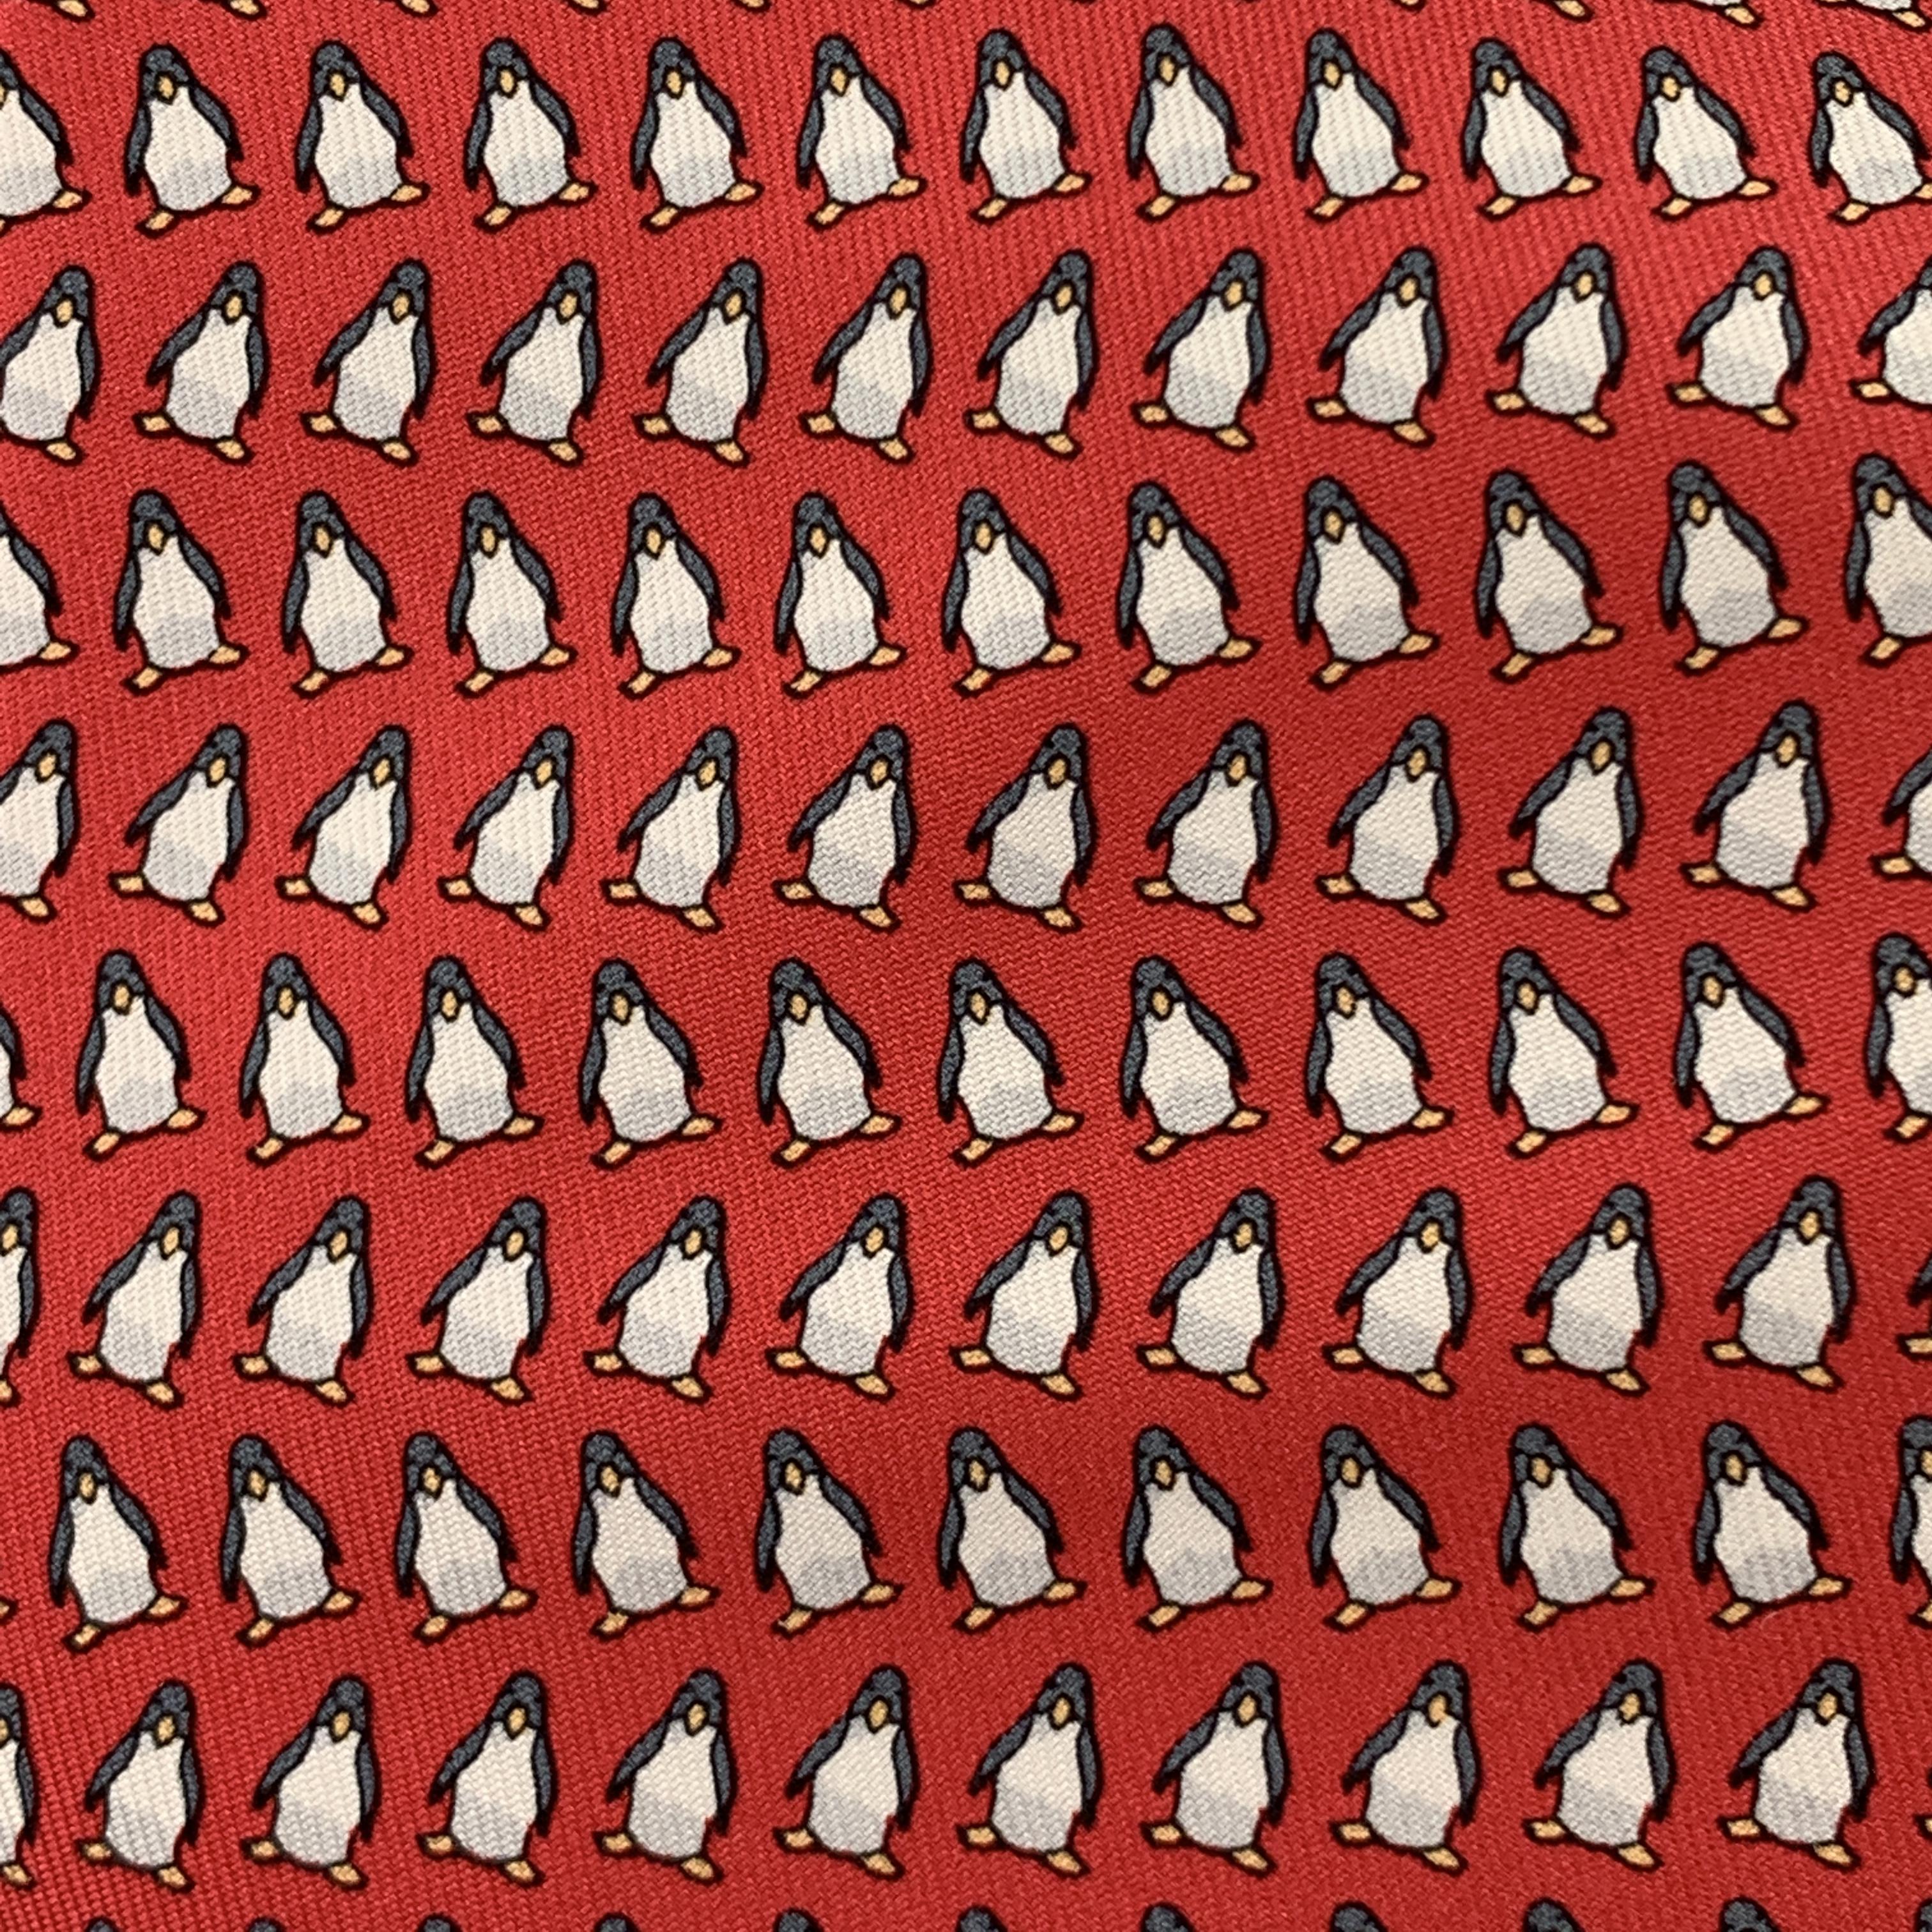 HERMES necktie comes in red silk twill with all over penguins print. Made in France.

Excellent Pre-Owned Condition.

Width: 3.75 in.